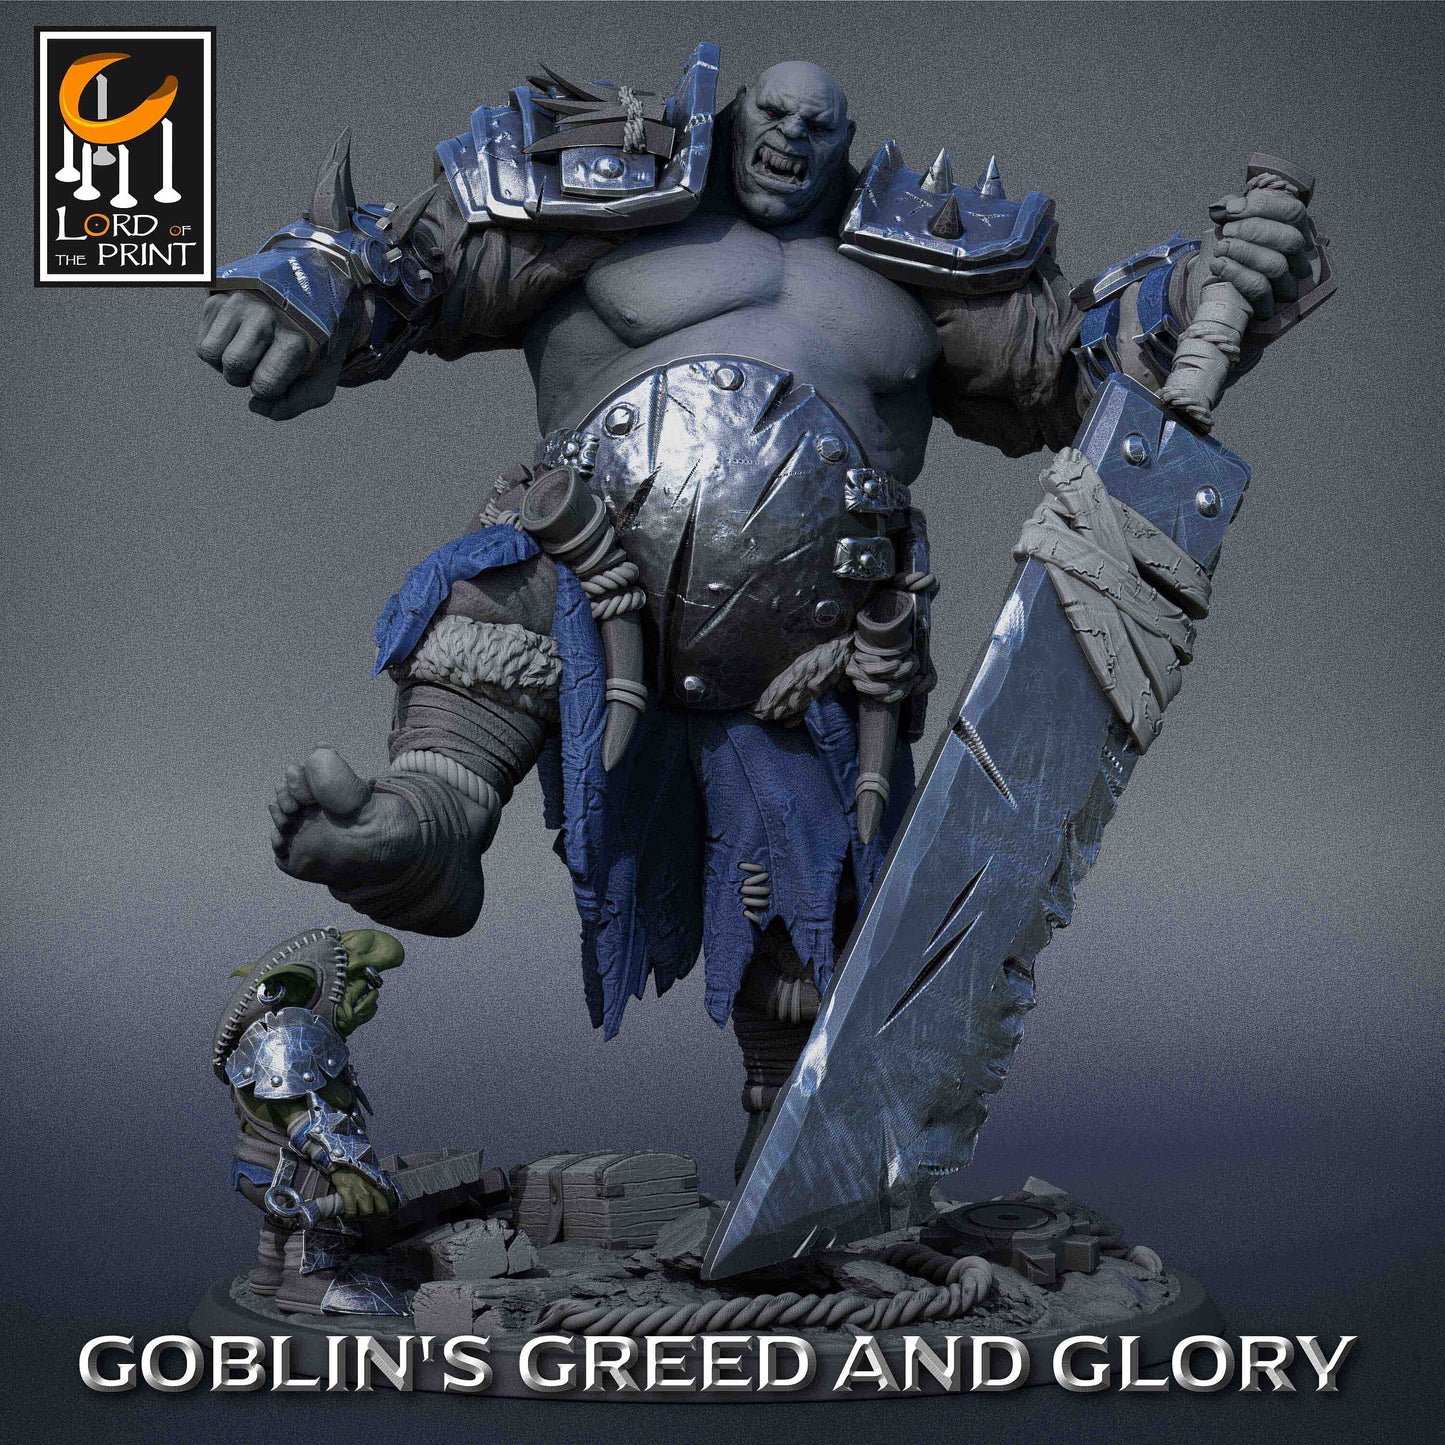 Ogres | RPG Miniature for Dungeons and Dragons|Pathfinder|Tabletop Wargaming | Ogre Miniature | Lord of the Print